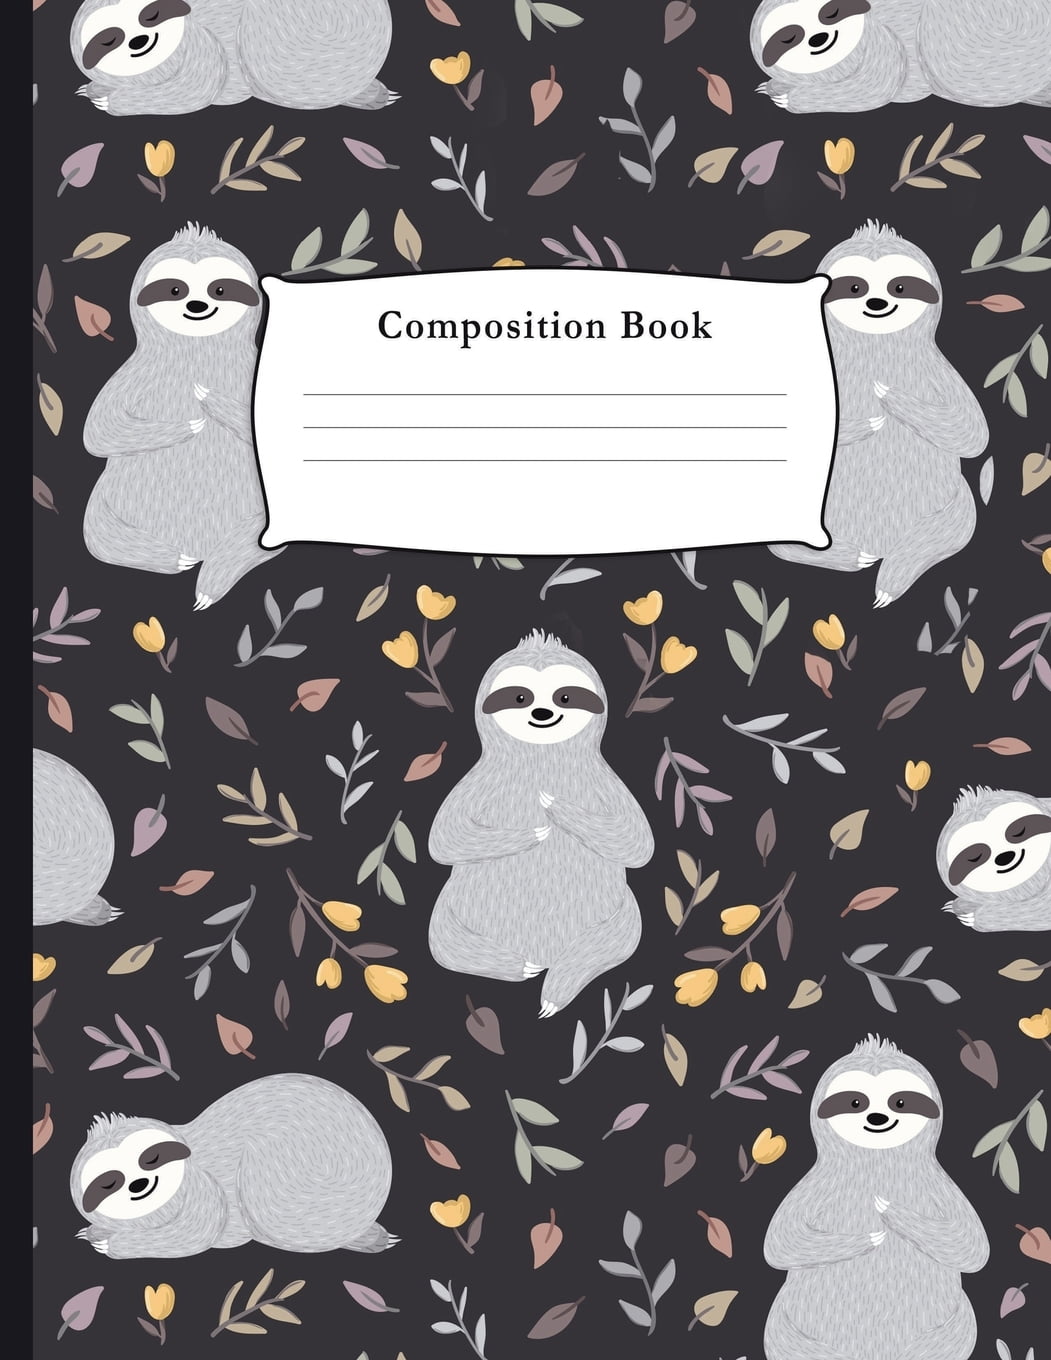 Composition Book Sloths College Ruled Notebook for Taking Notes
Journaling School or Work for Girls Sloth Notebooks Epub-Ebook